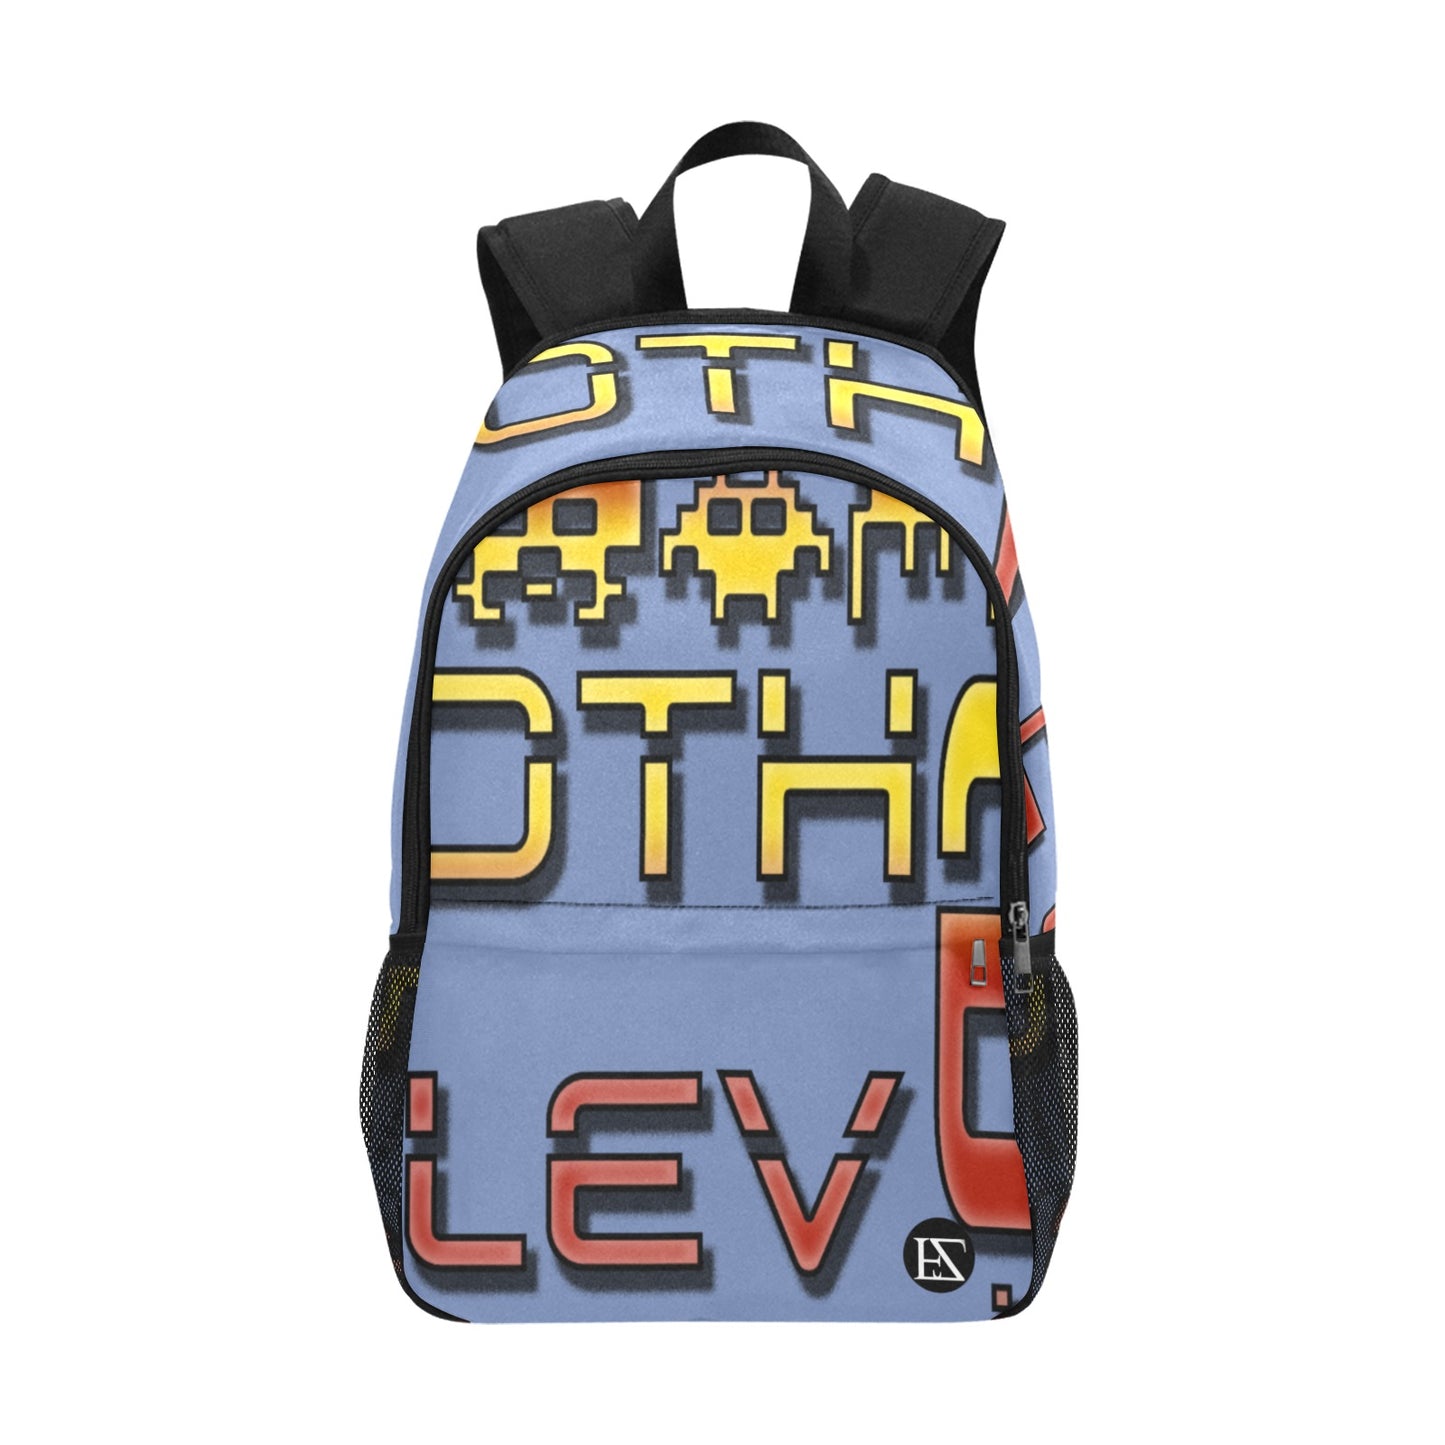 fz red levels backpack one size / fz levels backpack - blue all-over print unisex casual backpack with side mesh pockets (model 1659)